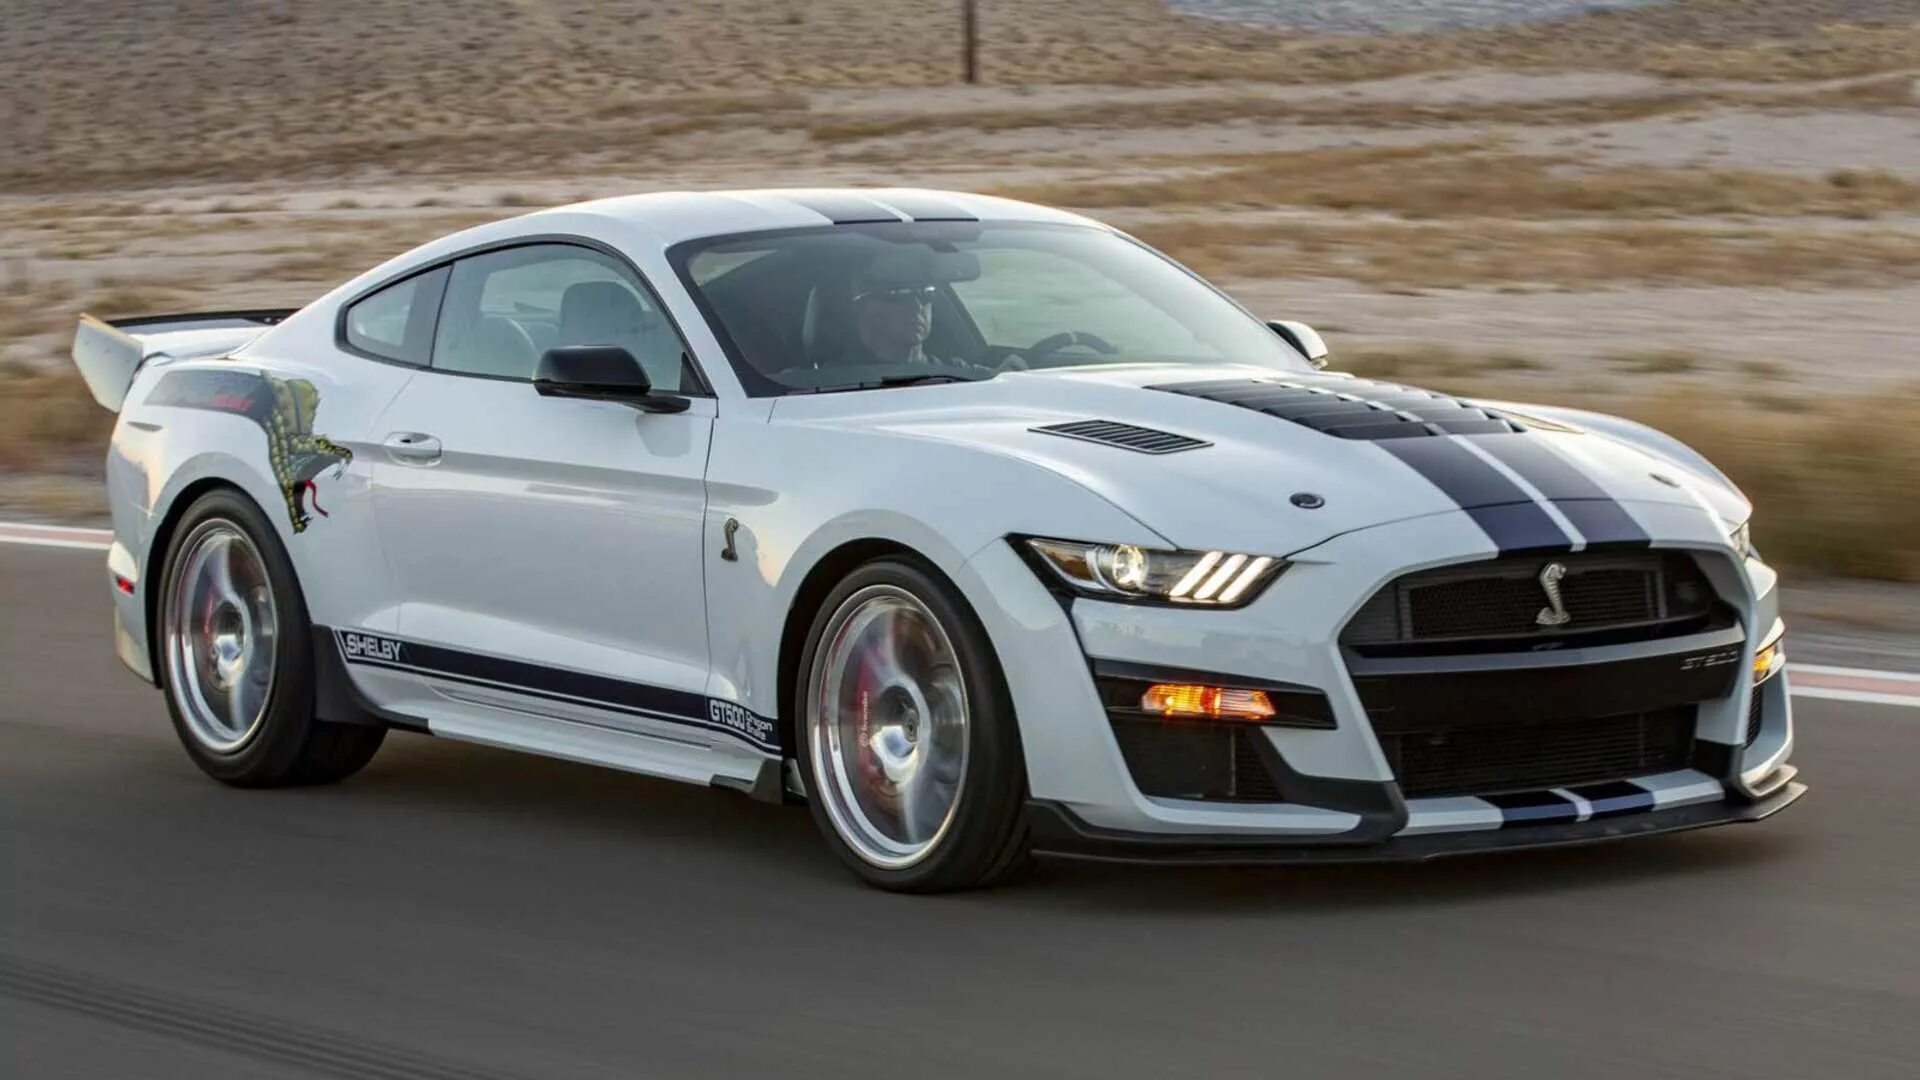 Mustang shelby gt 500. Форд Мустанг ГТ 500. Форд Мустанг ГТ 500 Шелби. Форд Мустанг Шелби gt 500 2020. Форд Мустанг 2021 Shelby gt500.